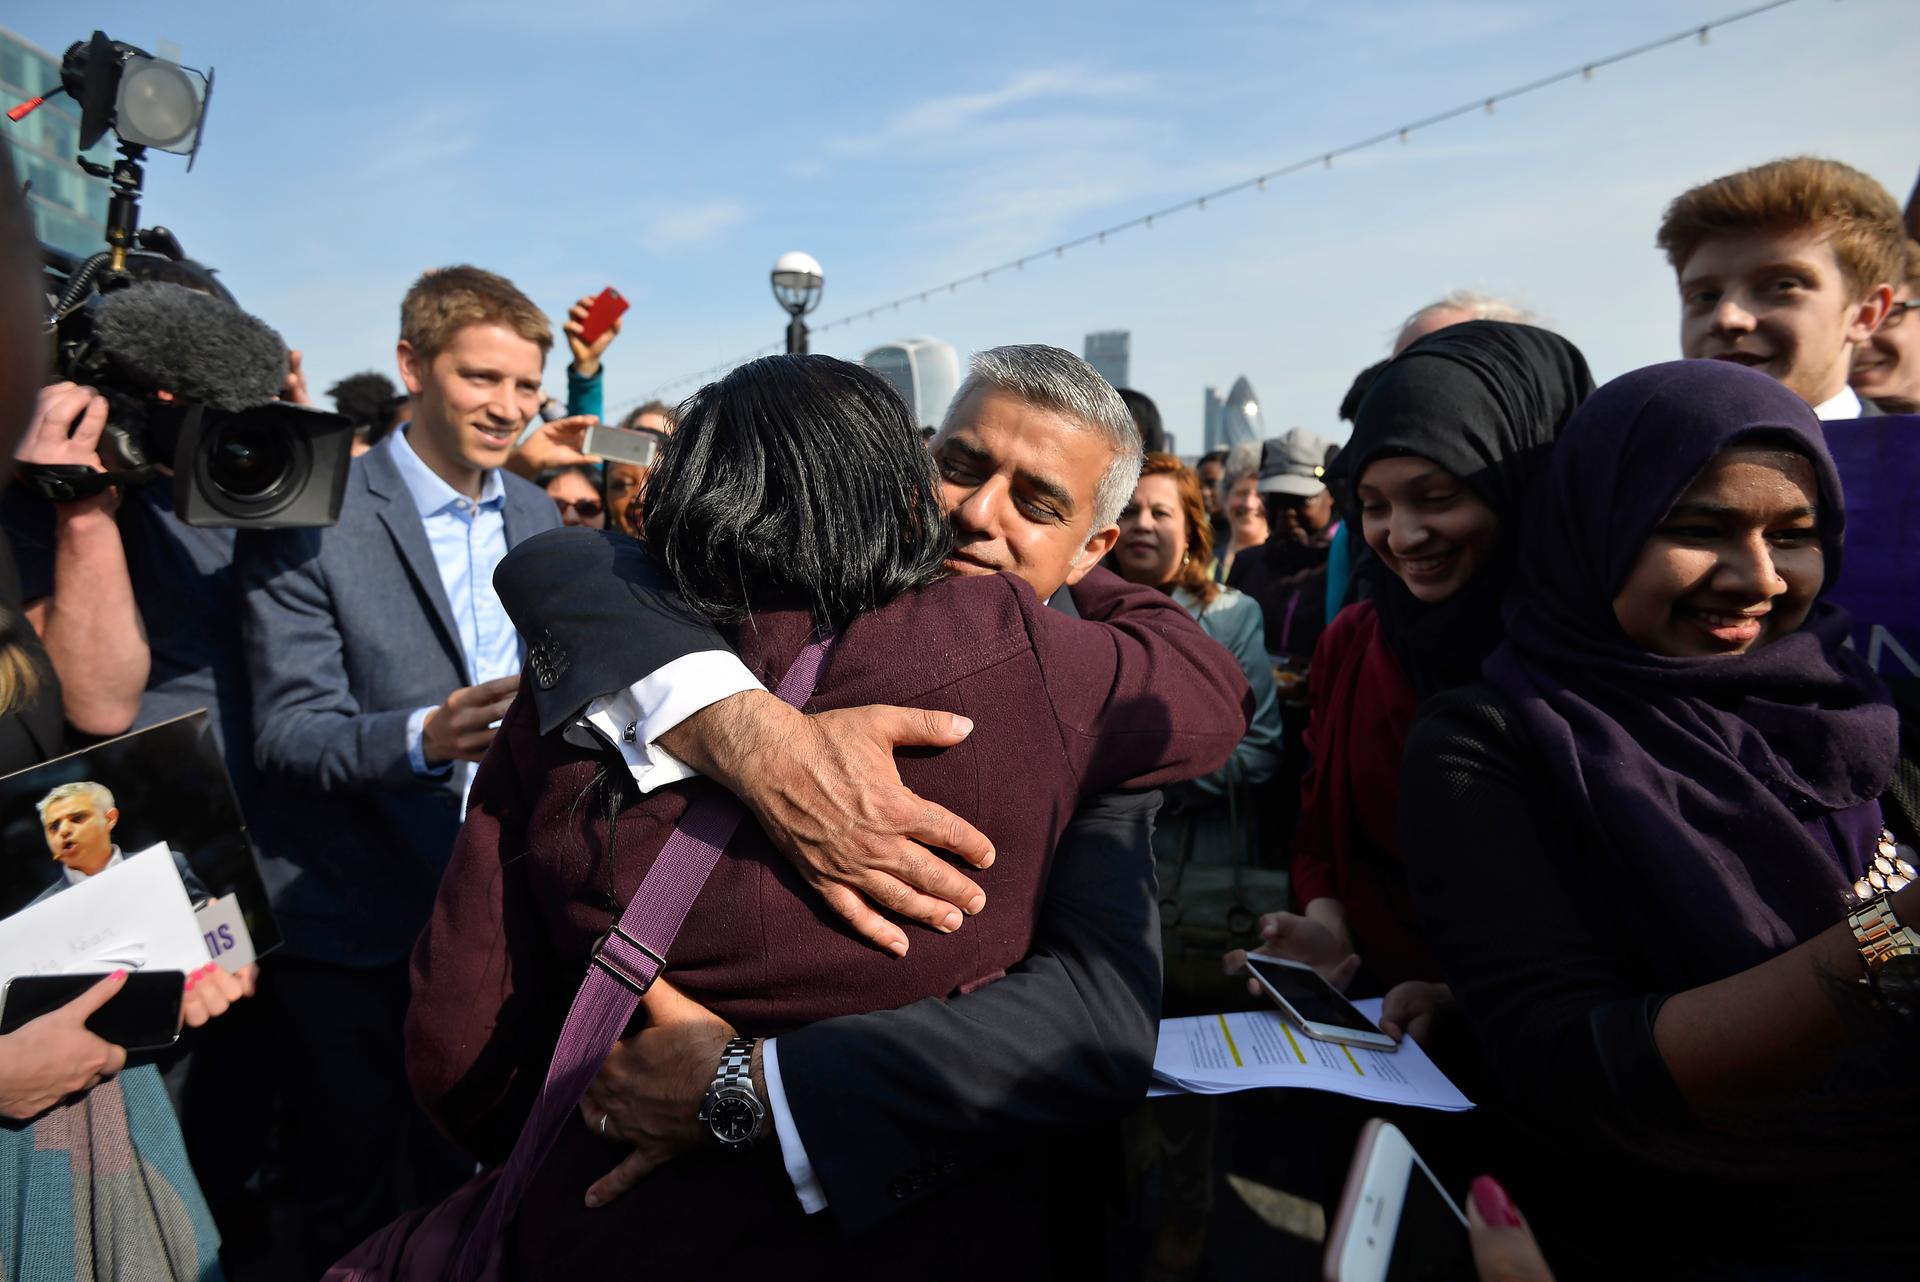 Britain's newly elected mayor Sadiq Khan is embraced by a supporter as he arrives for his first day at work at City Hall in London, Britain May 9, 2016.